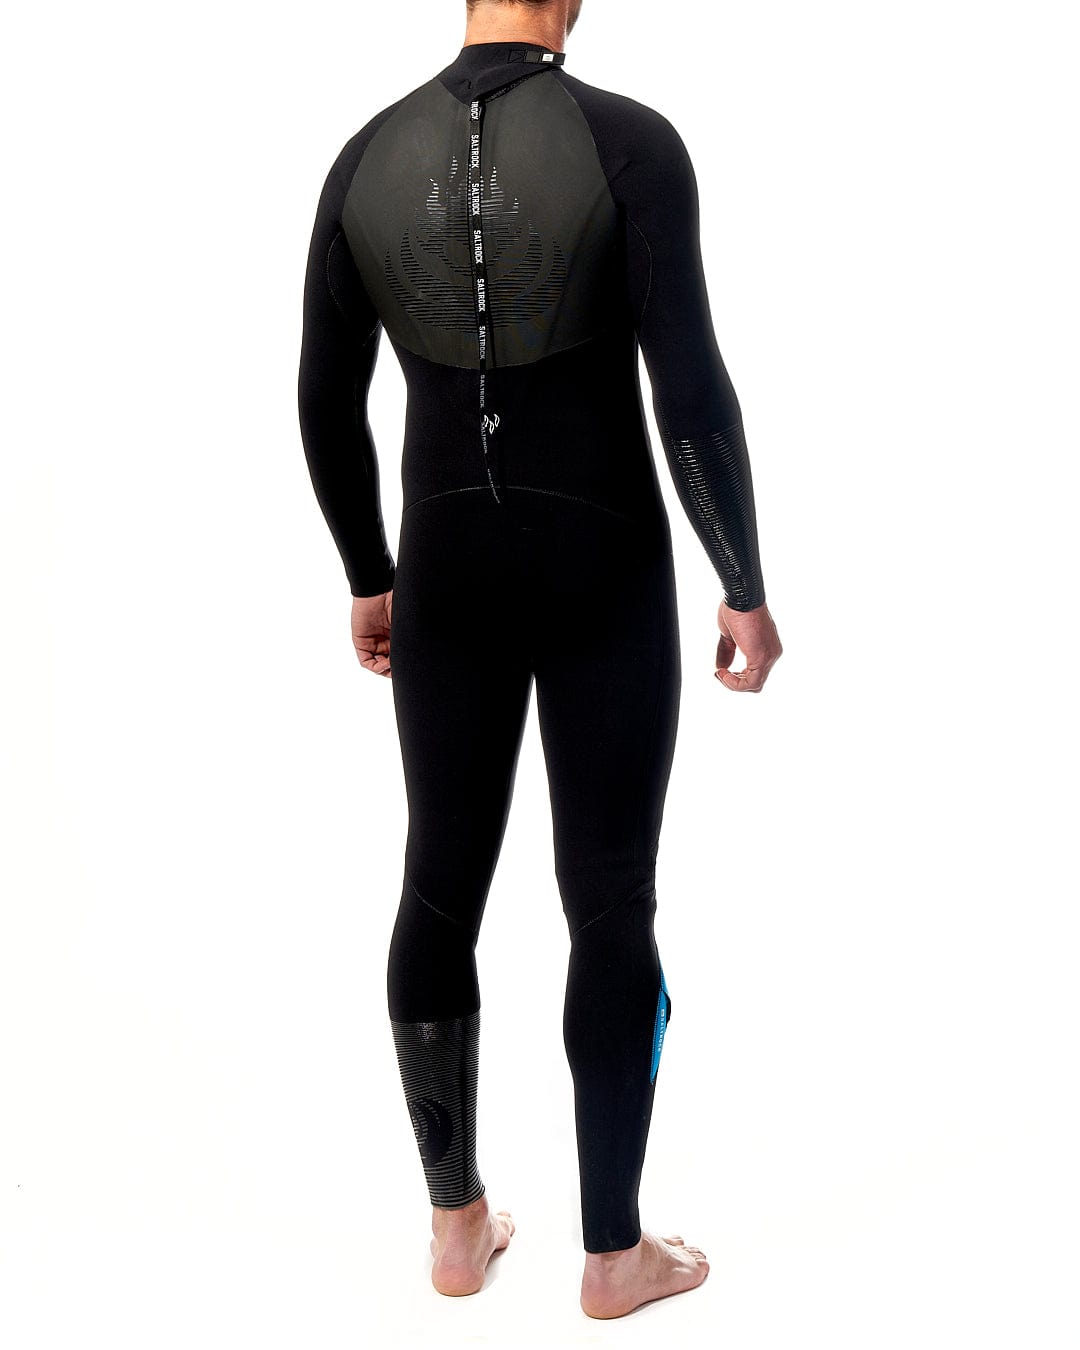 The back view of a man in a Saltrock Synthesis - Mens 4/3 Back Zip Full Wetsuit - Black.